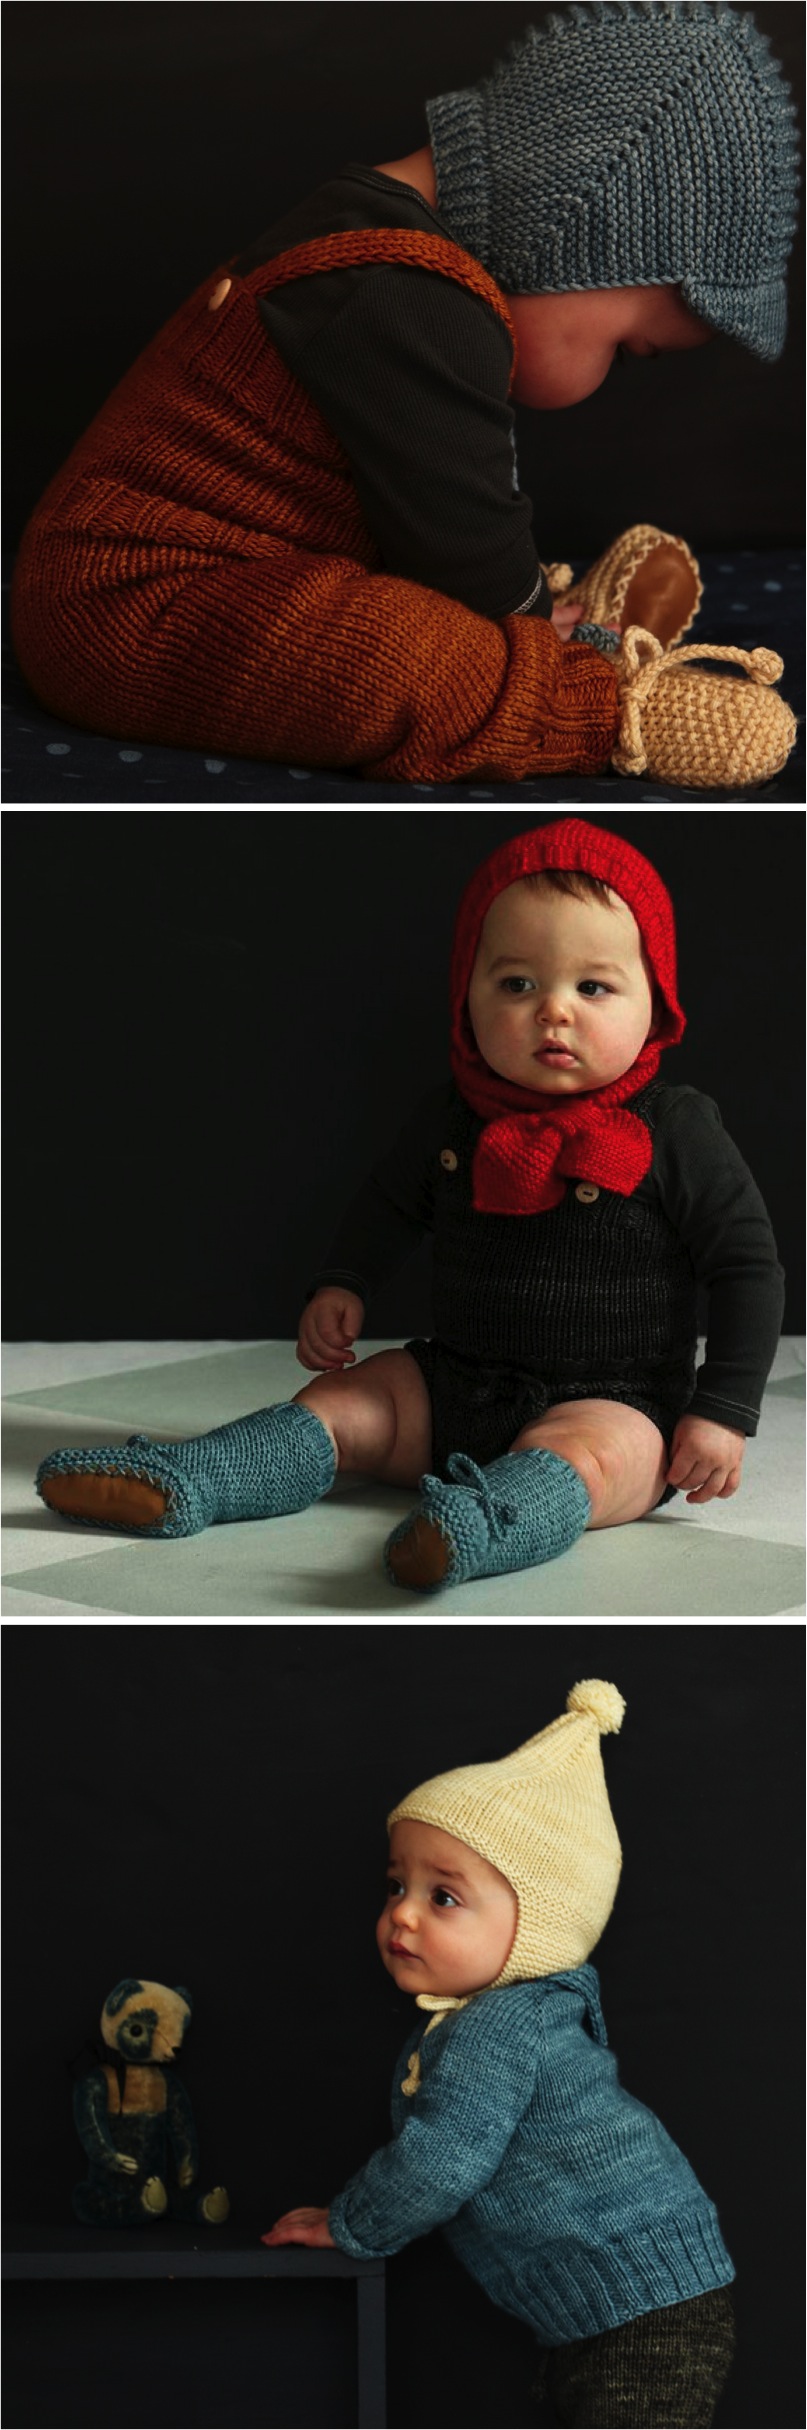 "hand knit baby clothes"